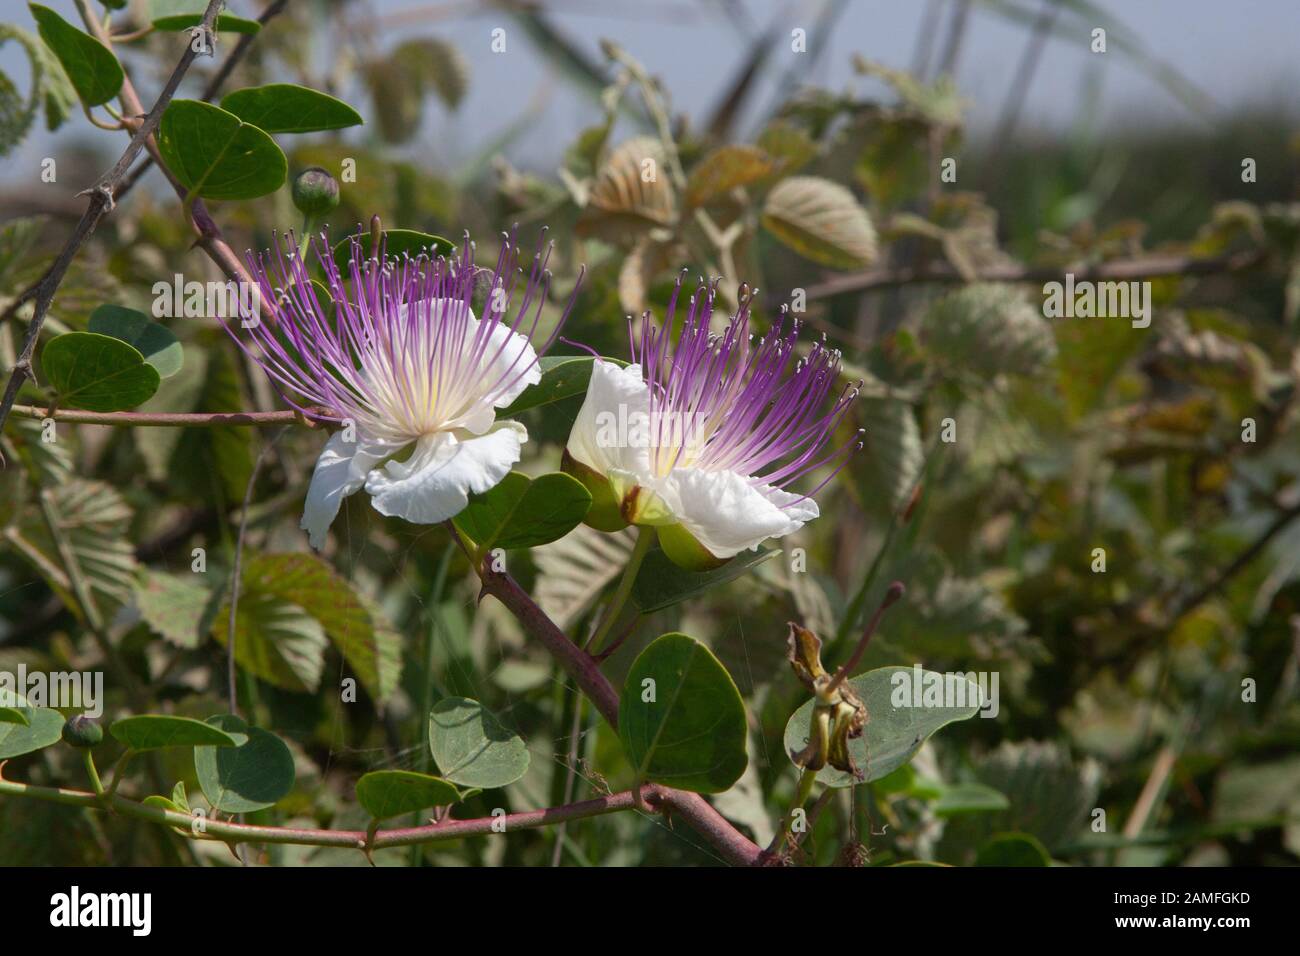 Capparidaceae High Resolution Stock Photography and Images - Alamy